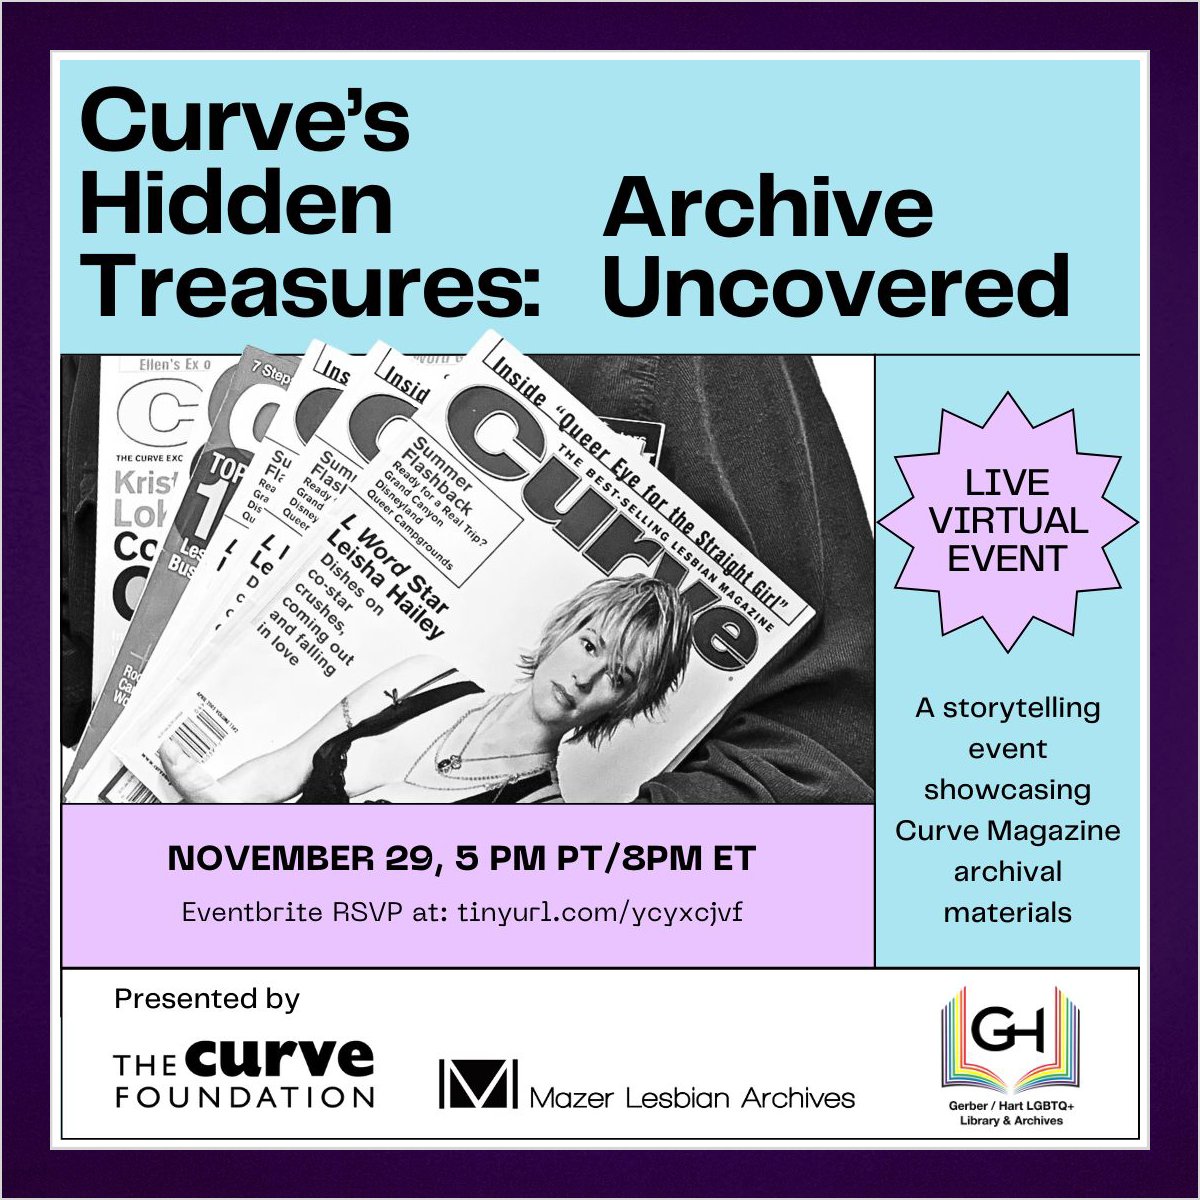 Not to late to RSVP for tonight's FREE virtual storytelling event showcasing Curve's archival materials housed at The June Mazer Lesbian Archives, Gerber/Hart Library & Archives, and from Franco's collection! WHEN: Wed, Nov 29, 5pm PT / 8pm ET RSVP: 👉 tinyurl.com/ycyxcjvf